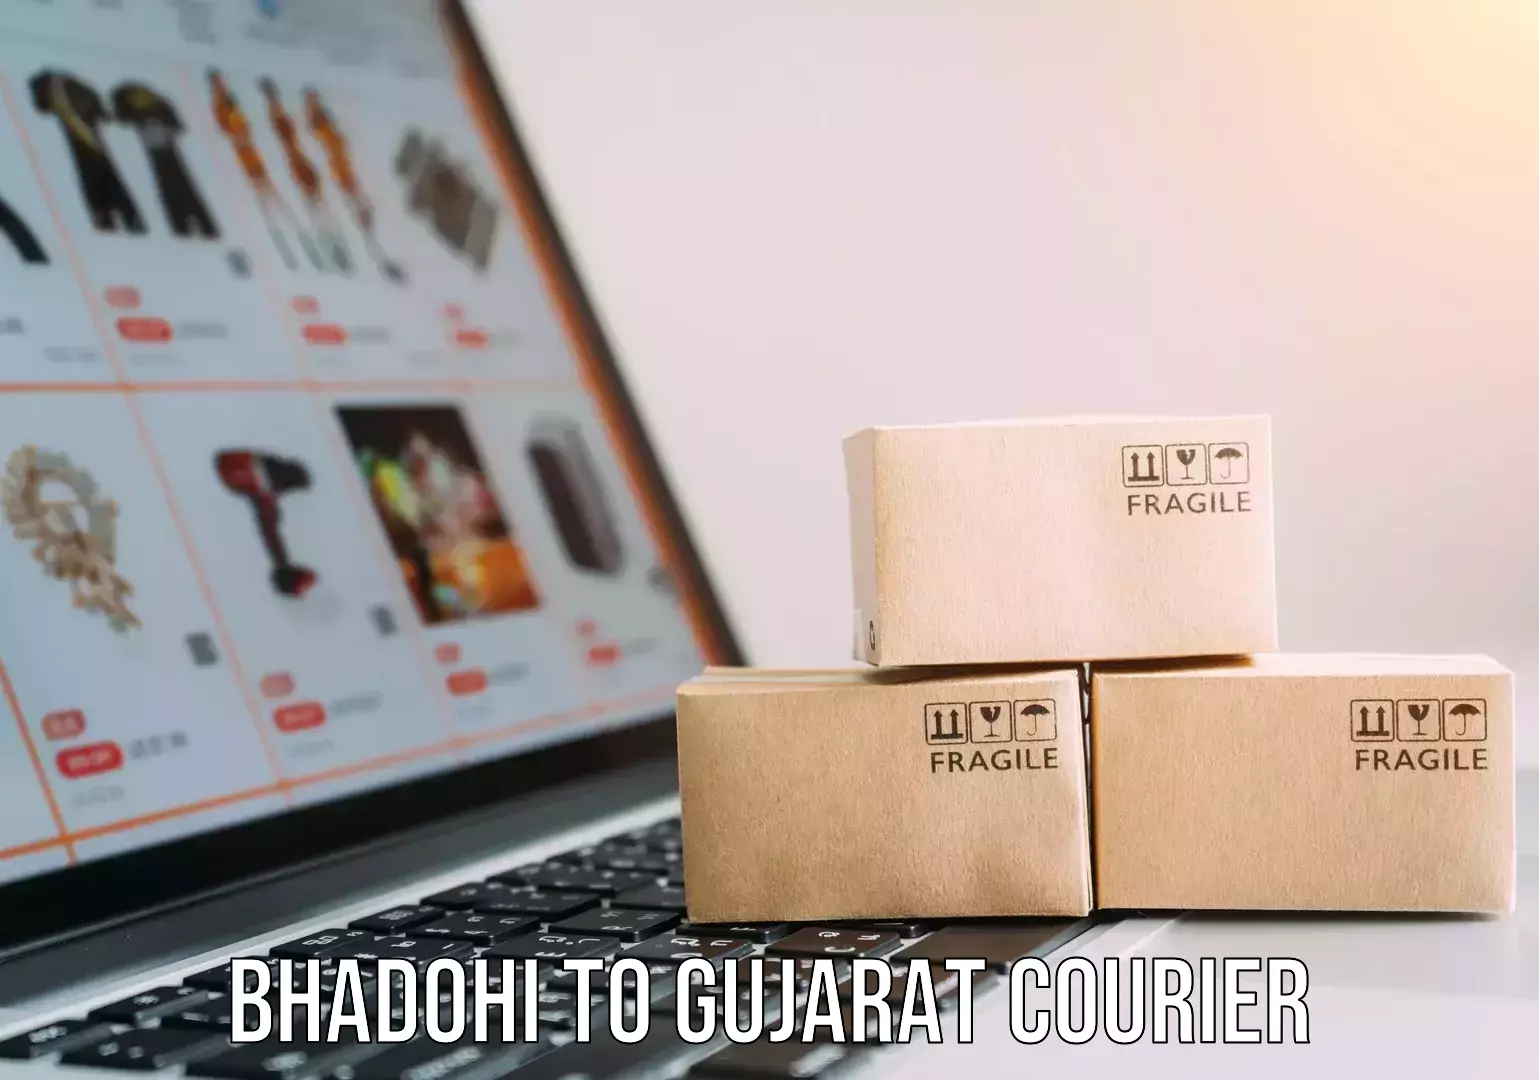 Courier service efficiency Bhadohi to Gujarat